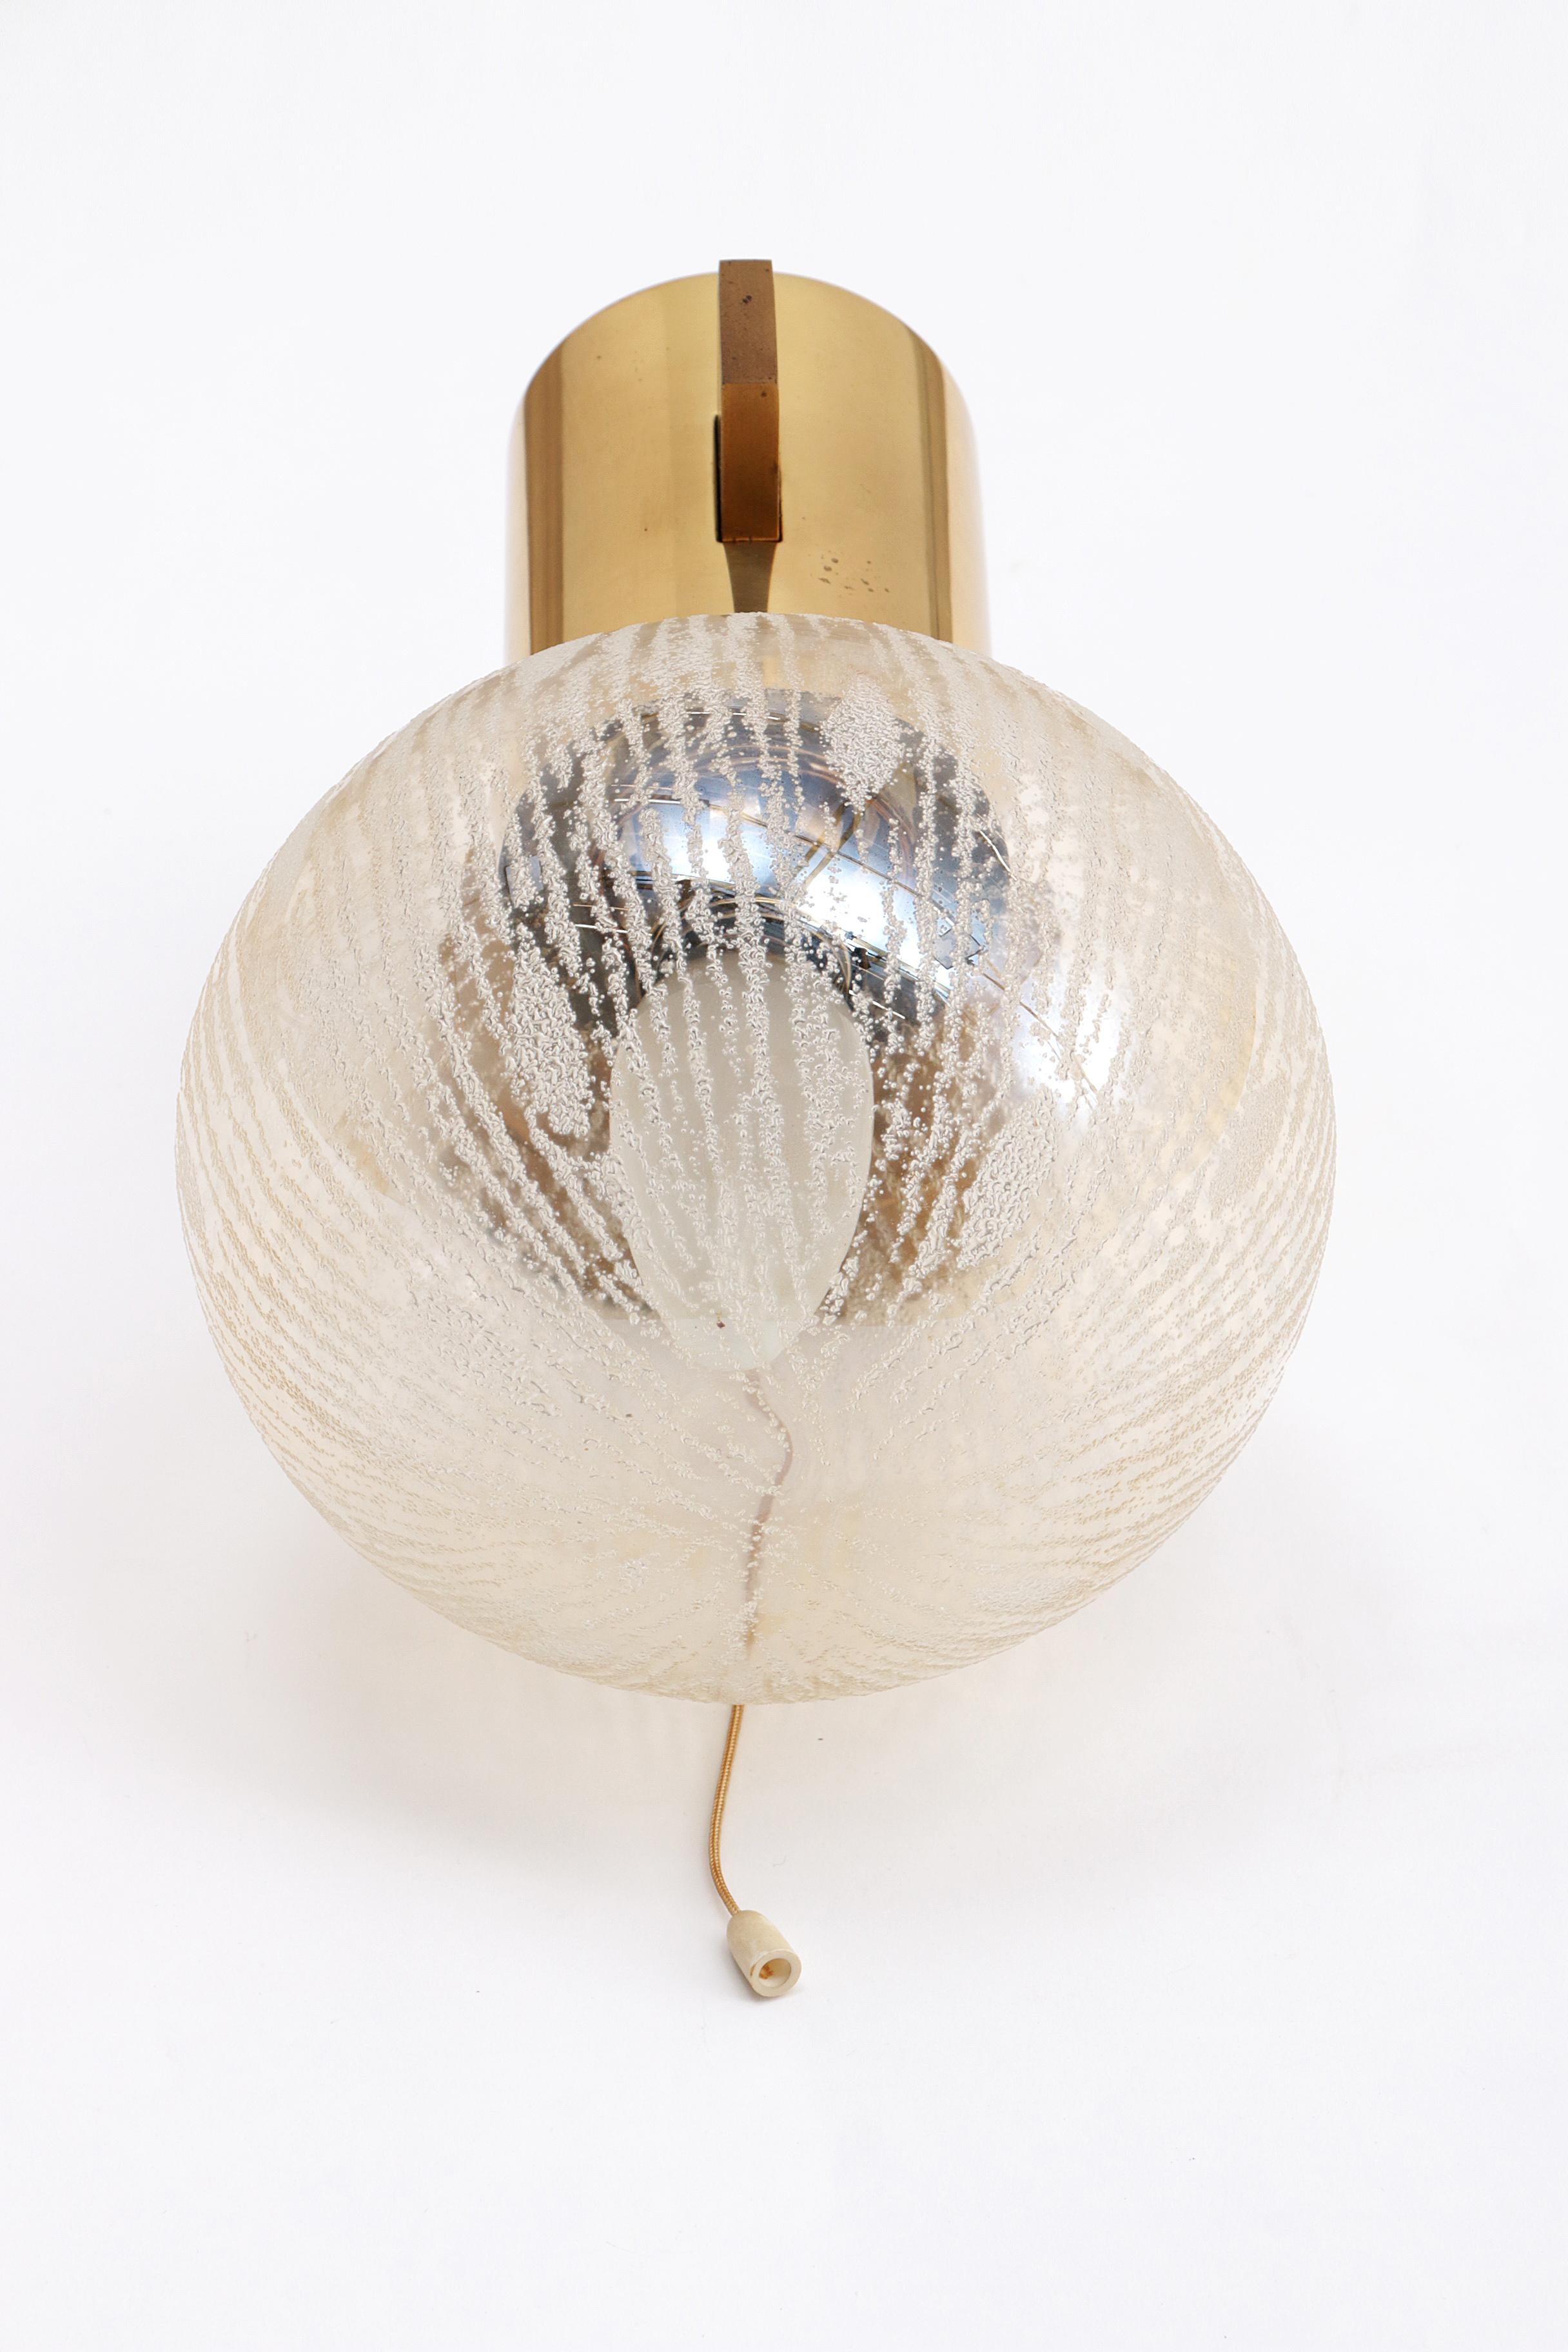 Hans-Agne Jakobsen brass wall lamp with glass Sweden 1960 For Sale 4